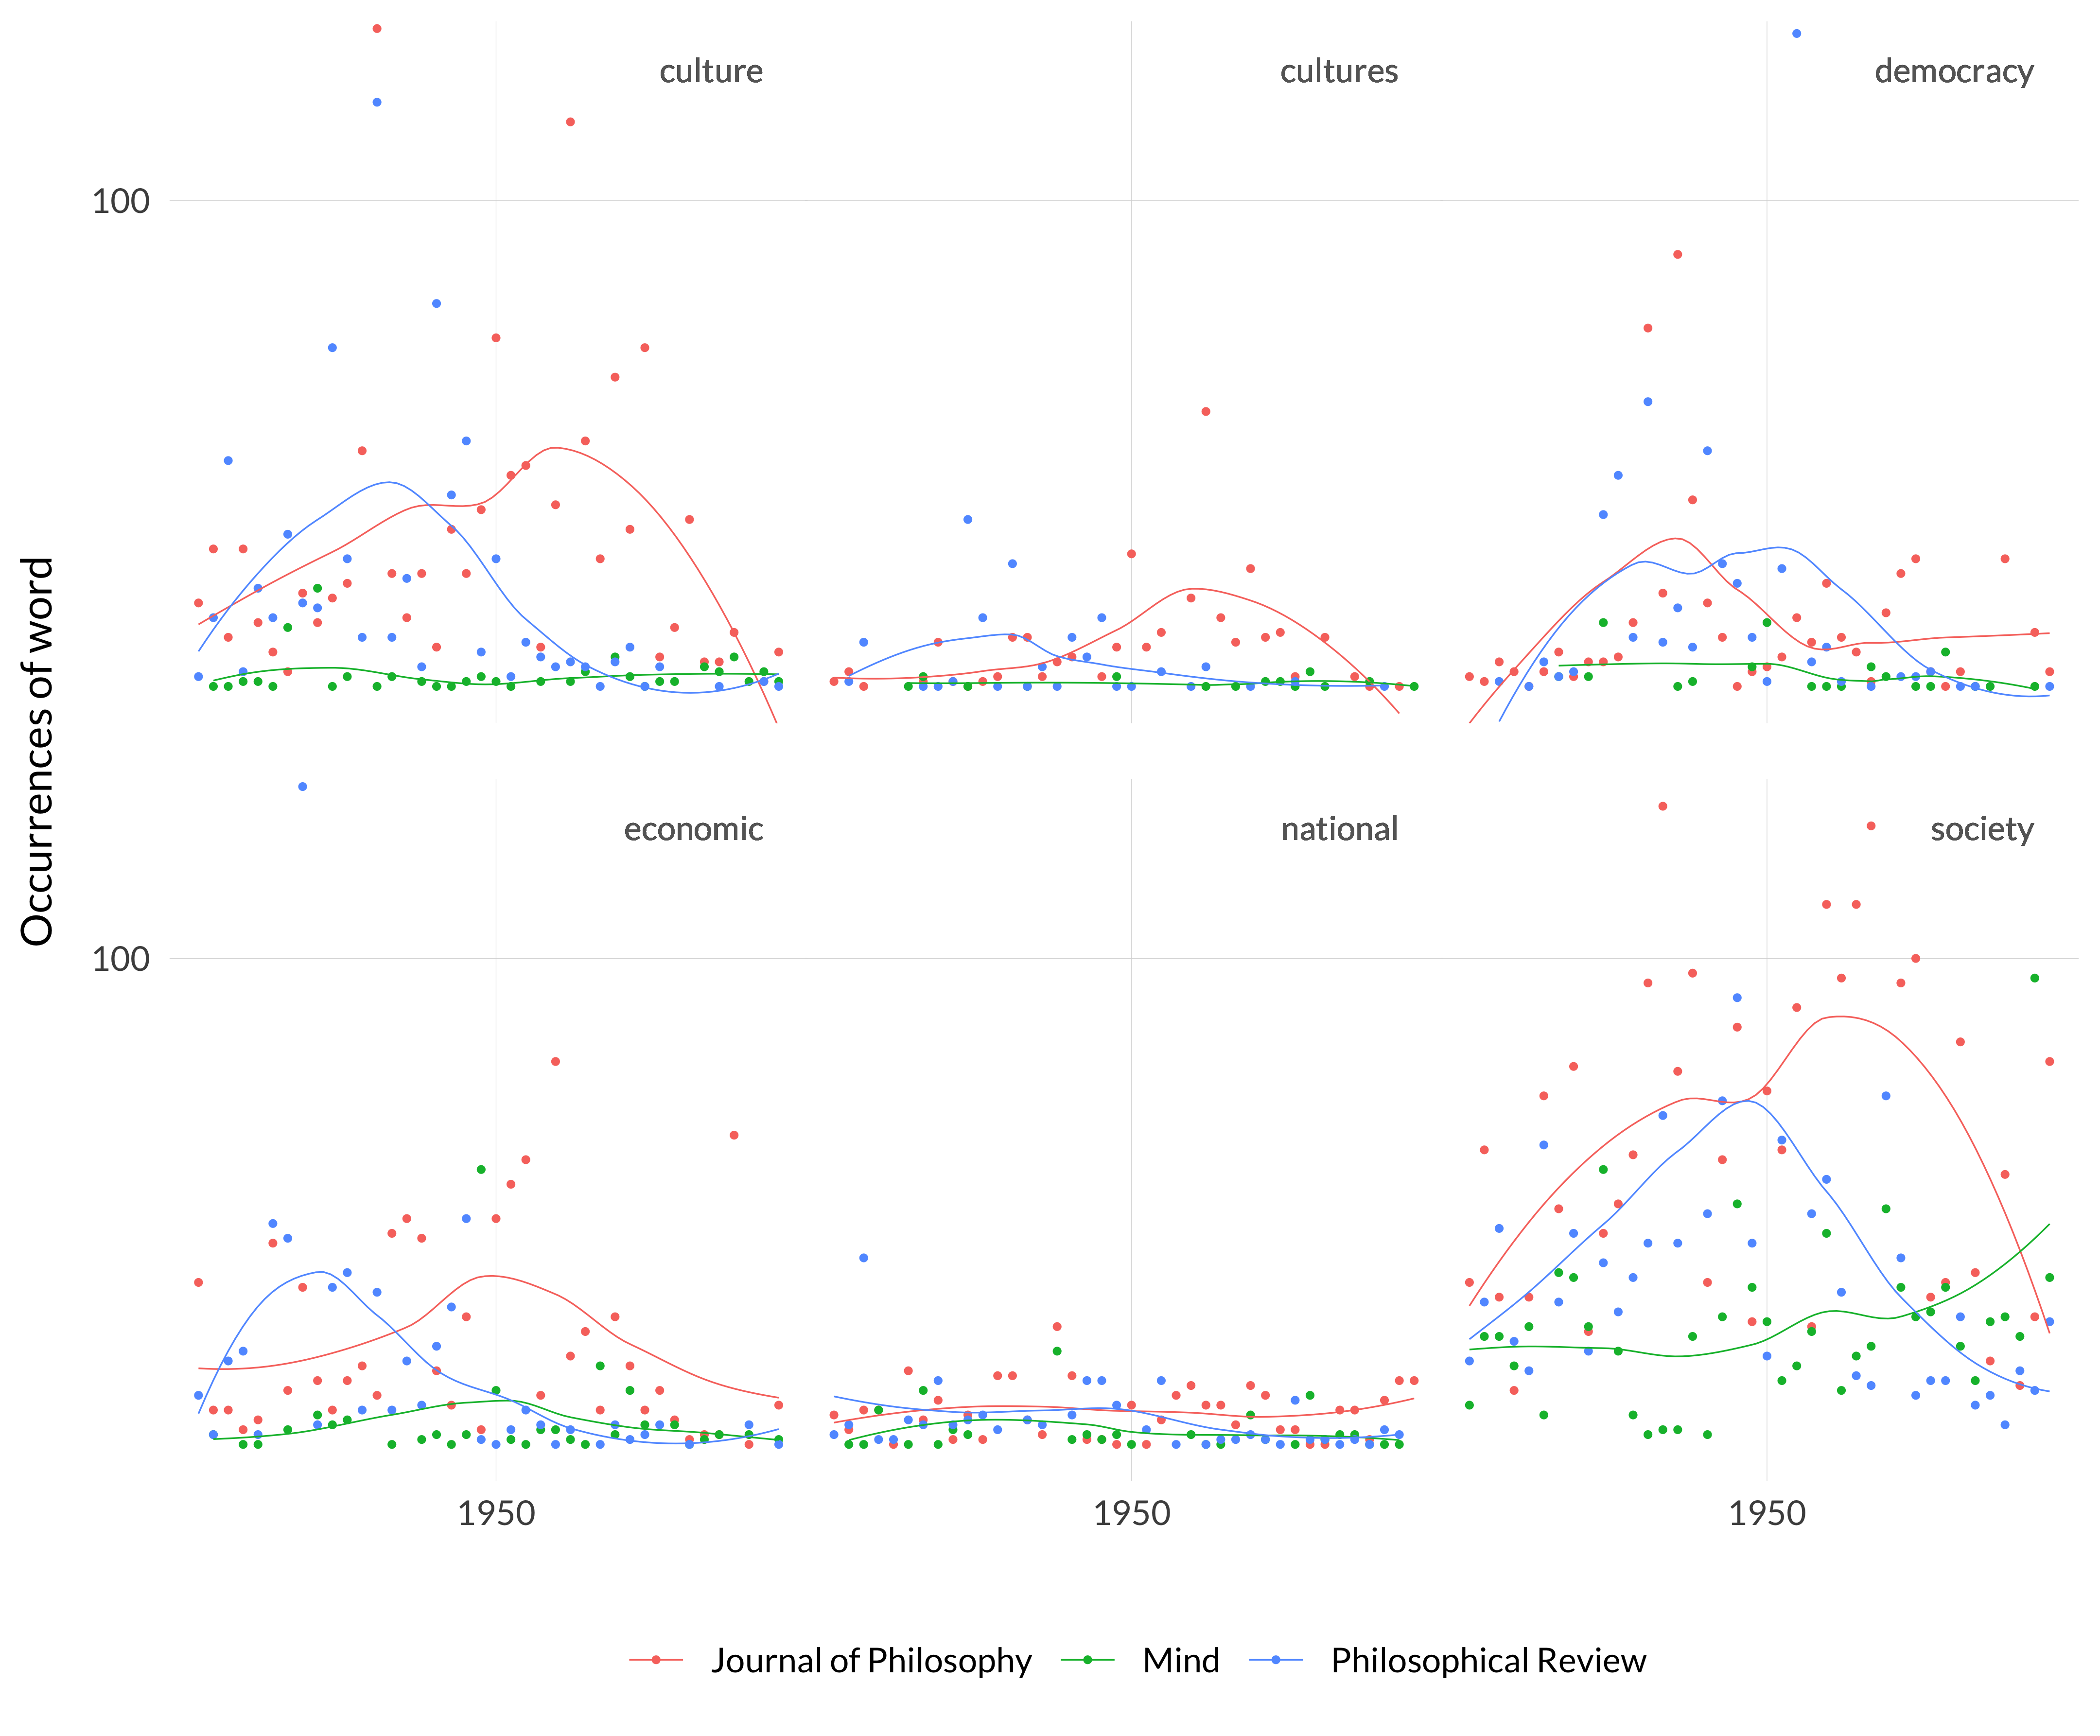 Six scatterplots showing the number of occurrences of the words economic, society, national, culture, cultures, democracy in the three big journals. The x-axis is the year, from 1930–1970. The y-axis is the frequency, from 0 to 100. The words culture and society fall away dramatically in frequency in Philosophical Review after about 1952, and after the late 1950s in Journal of Philosophy.